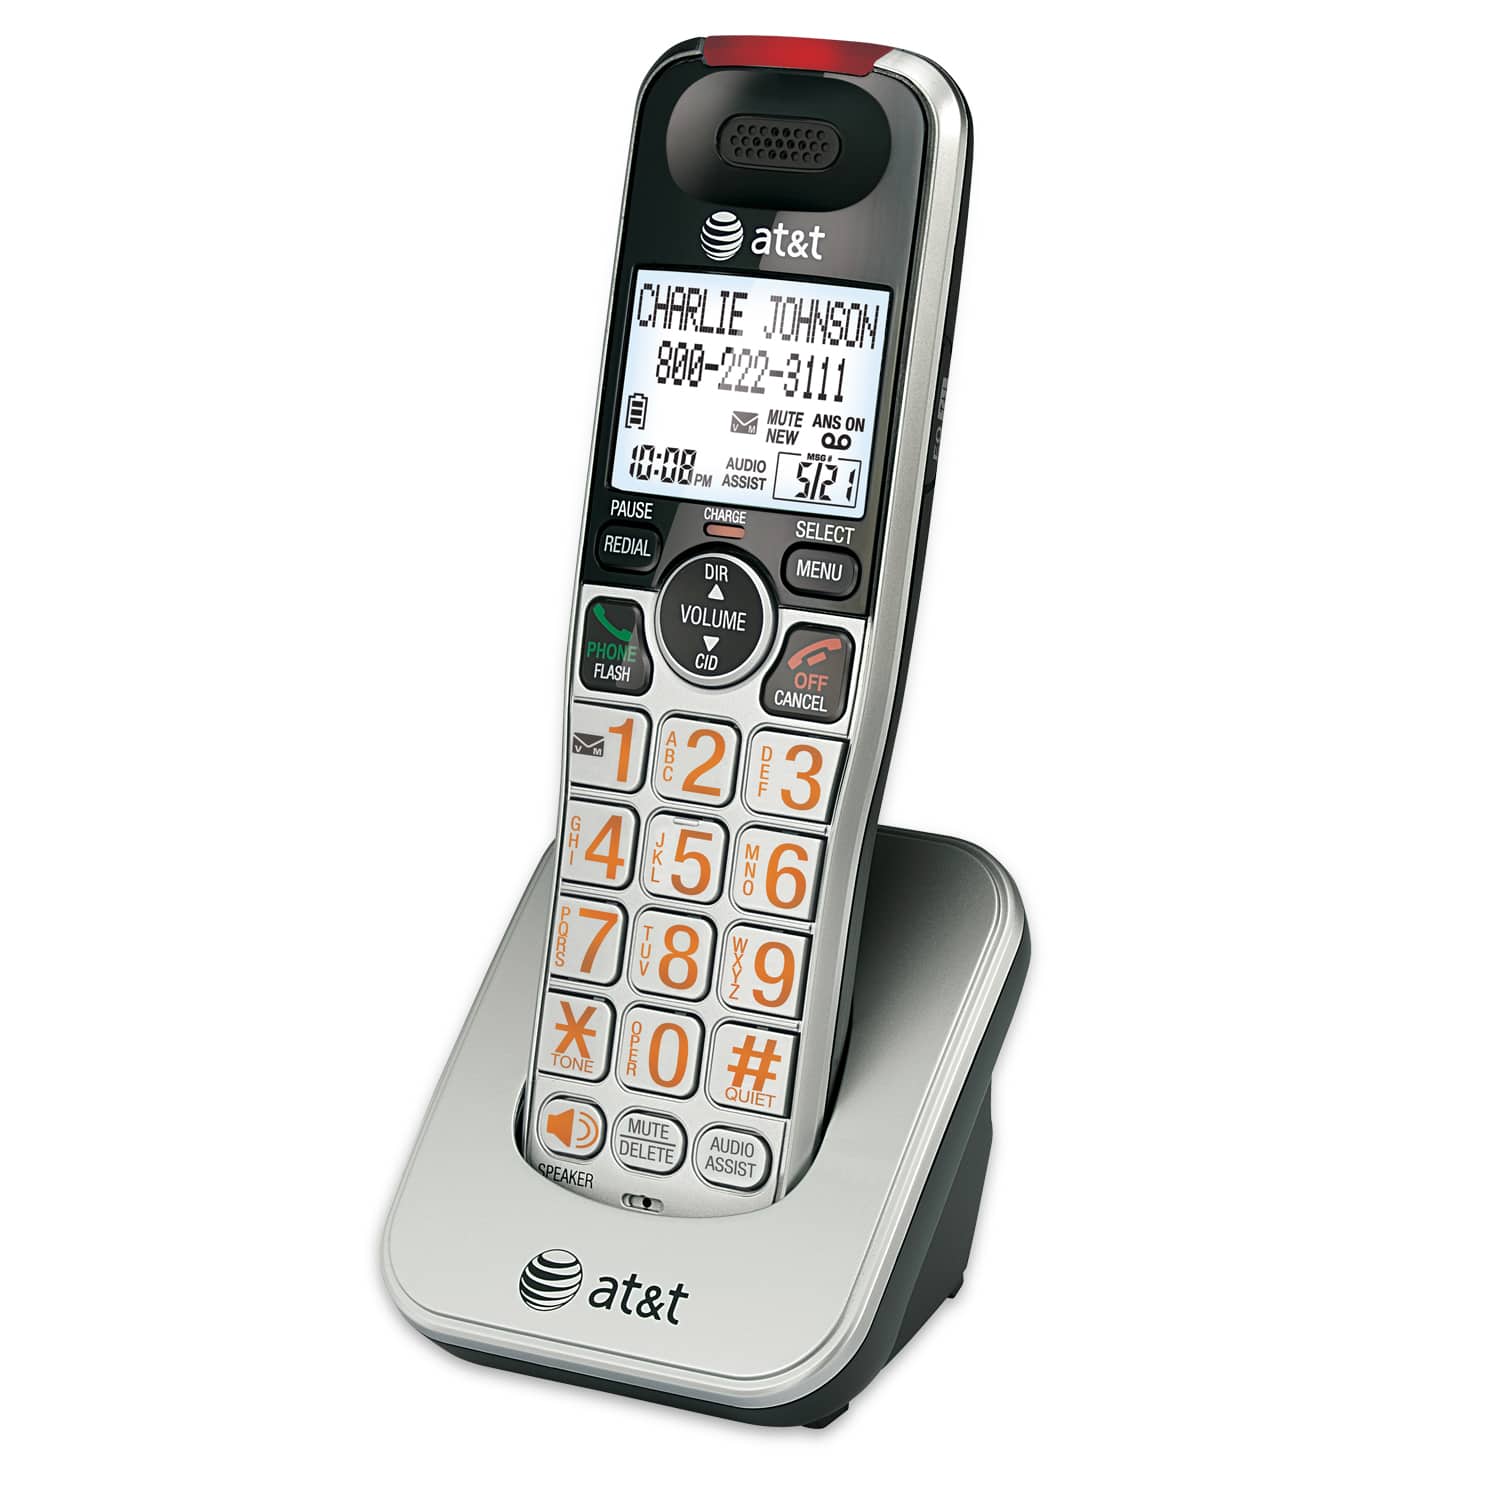 2 handset phone system with cordless headset - view 2